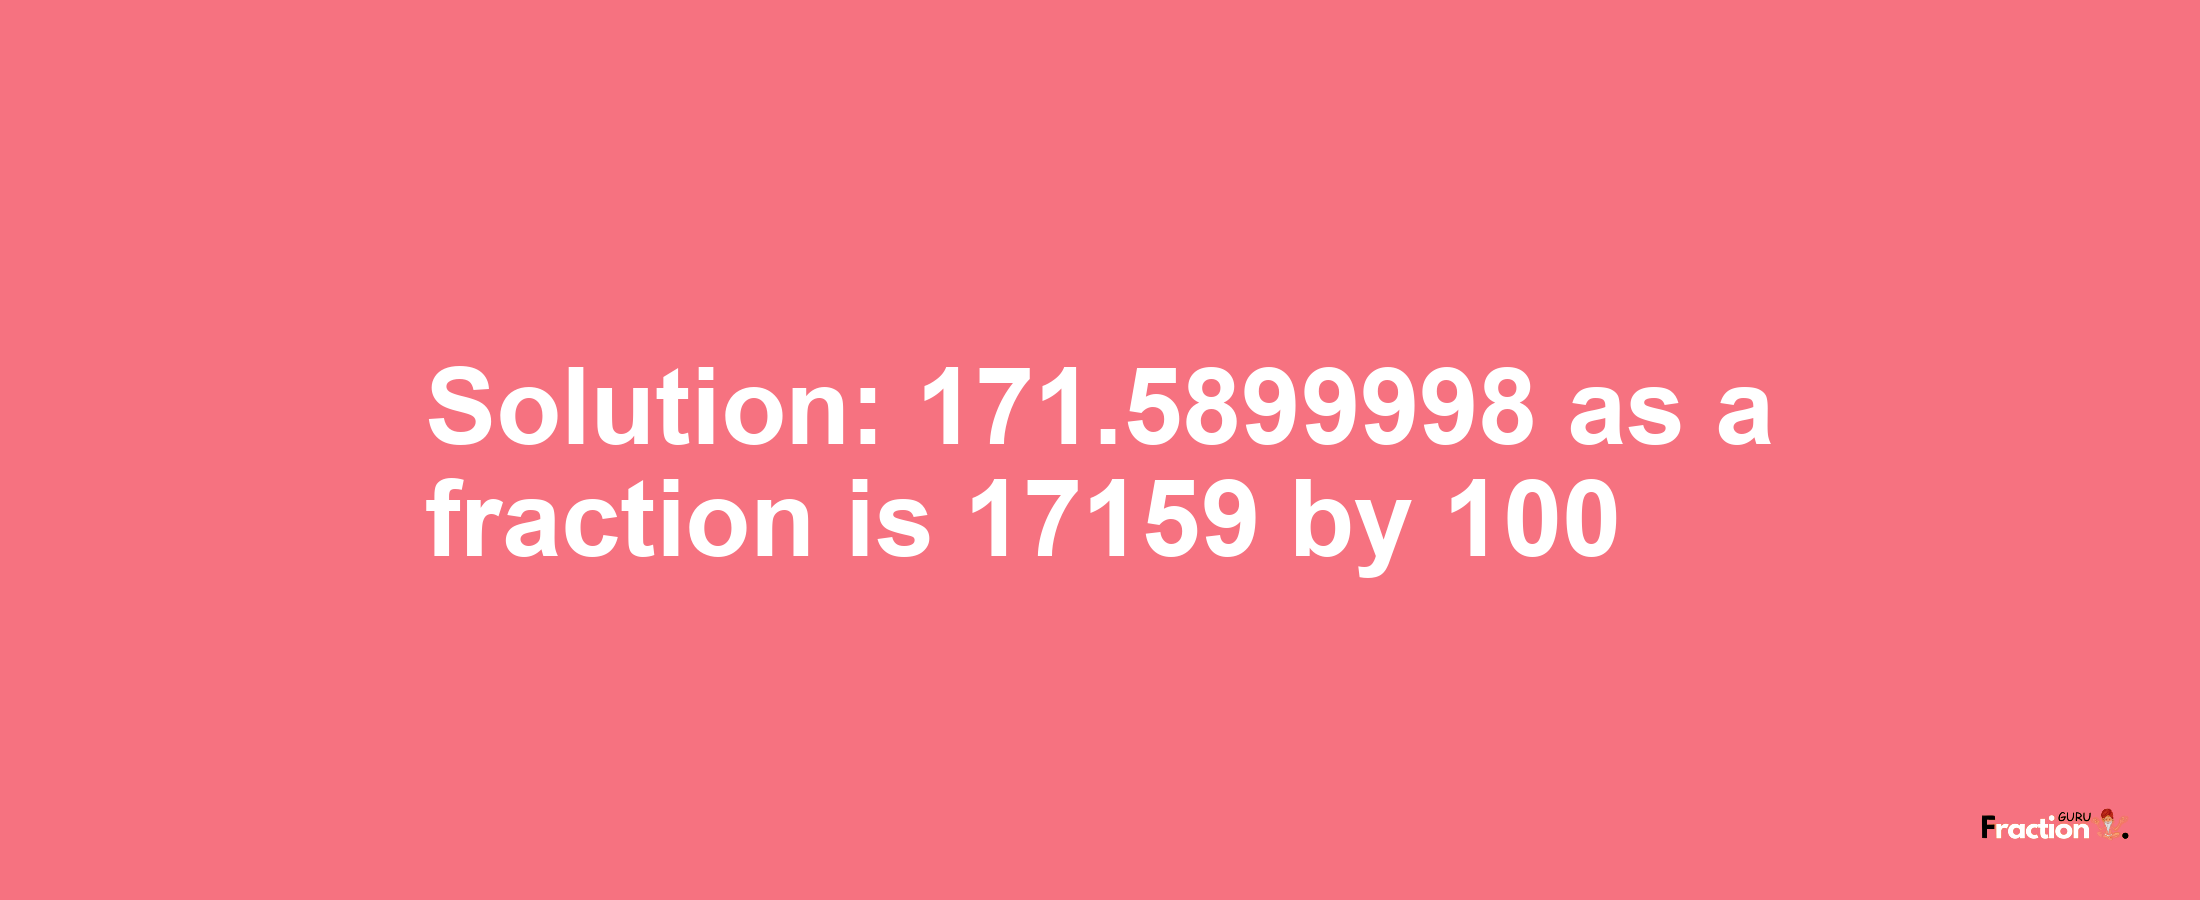 Solution:171.5899998 as a fraction is 17159/100